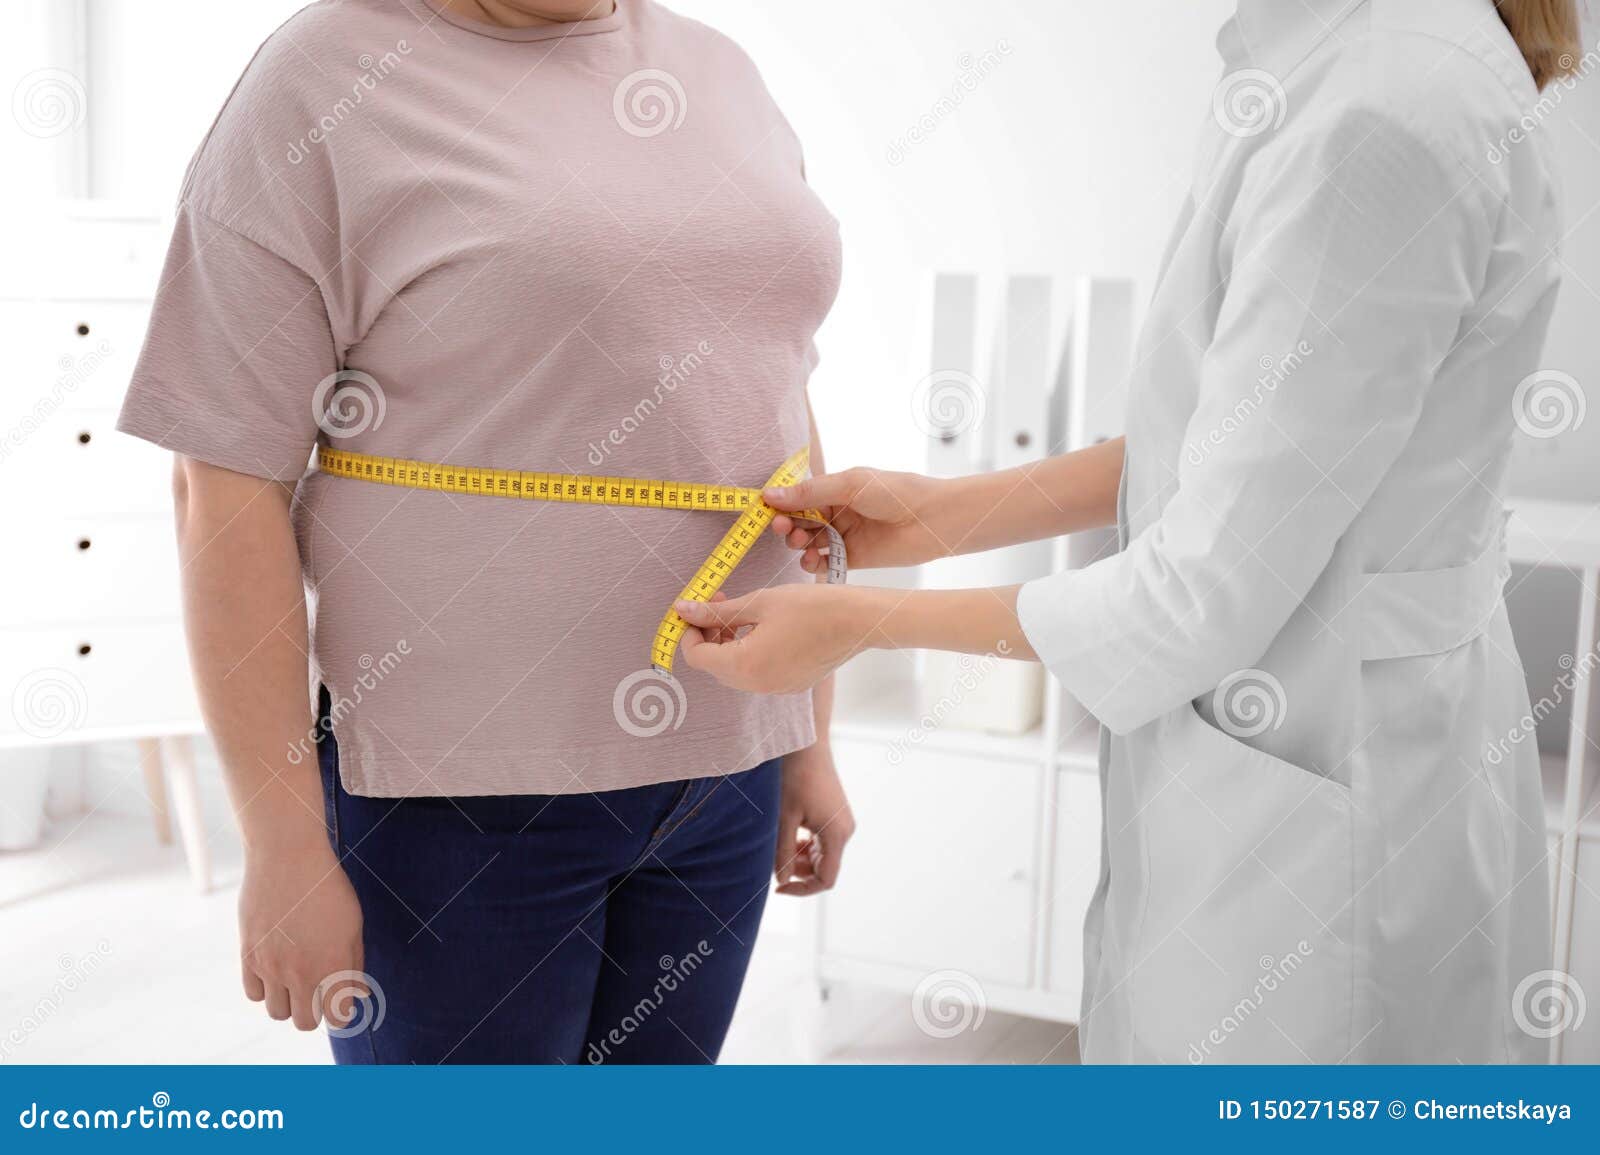 doctor measuring waist of overweight woman in clinic